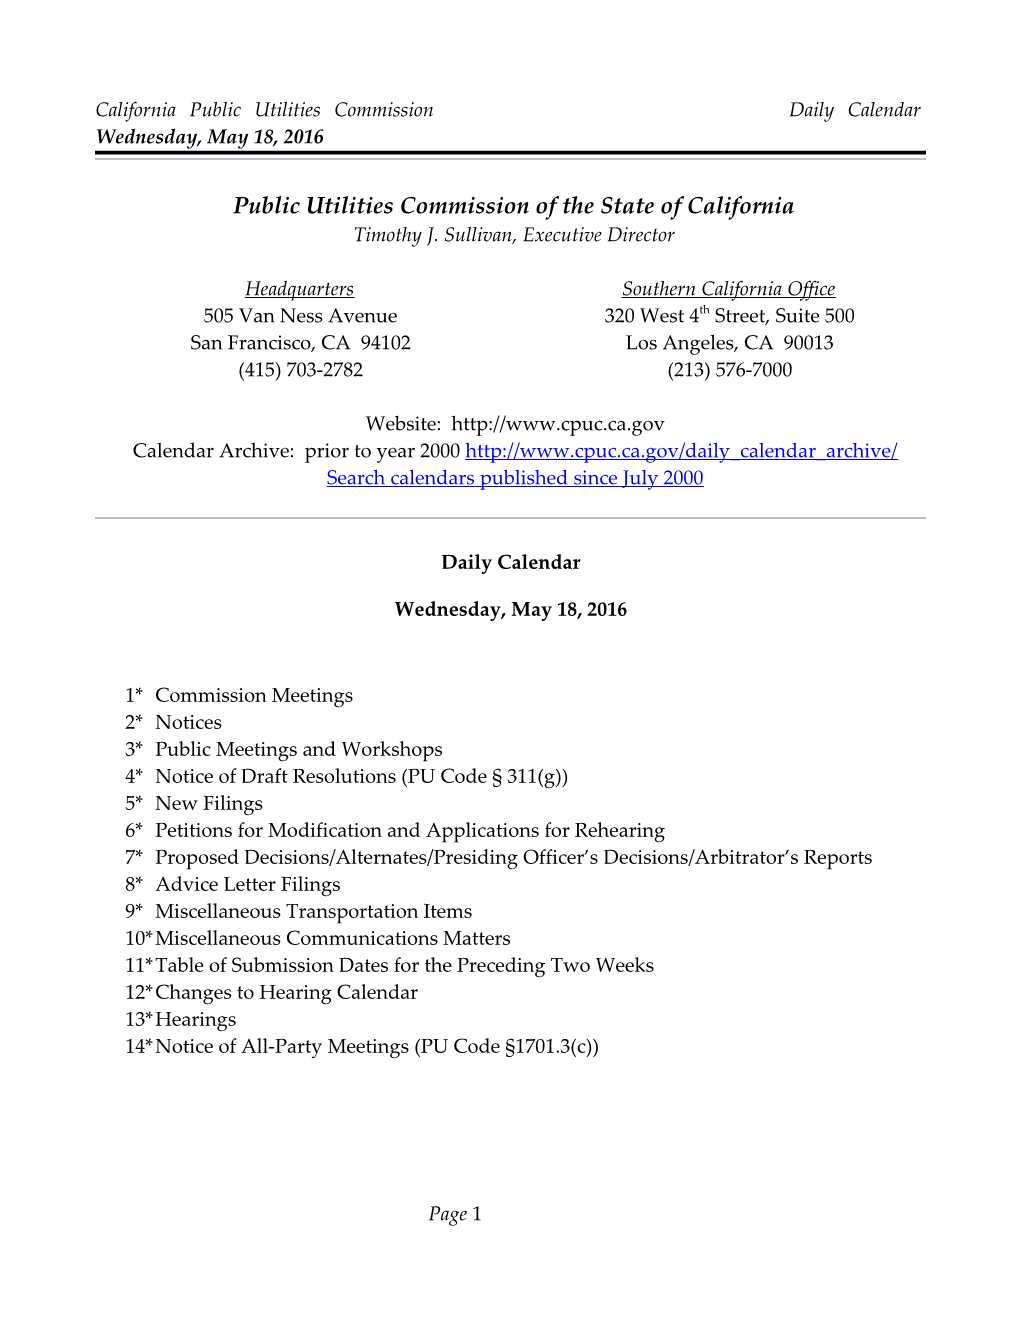 California Public Utilities Commission Daily Calendar Wednesday, May 18, 2016